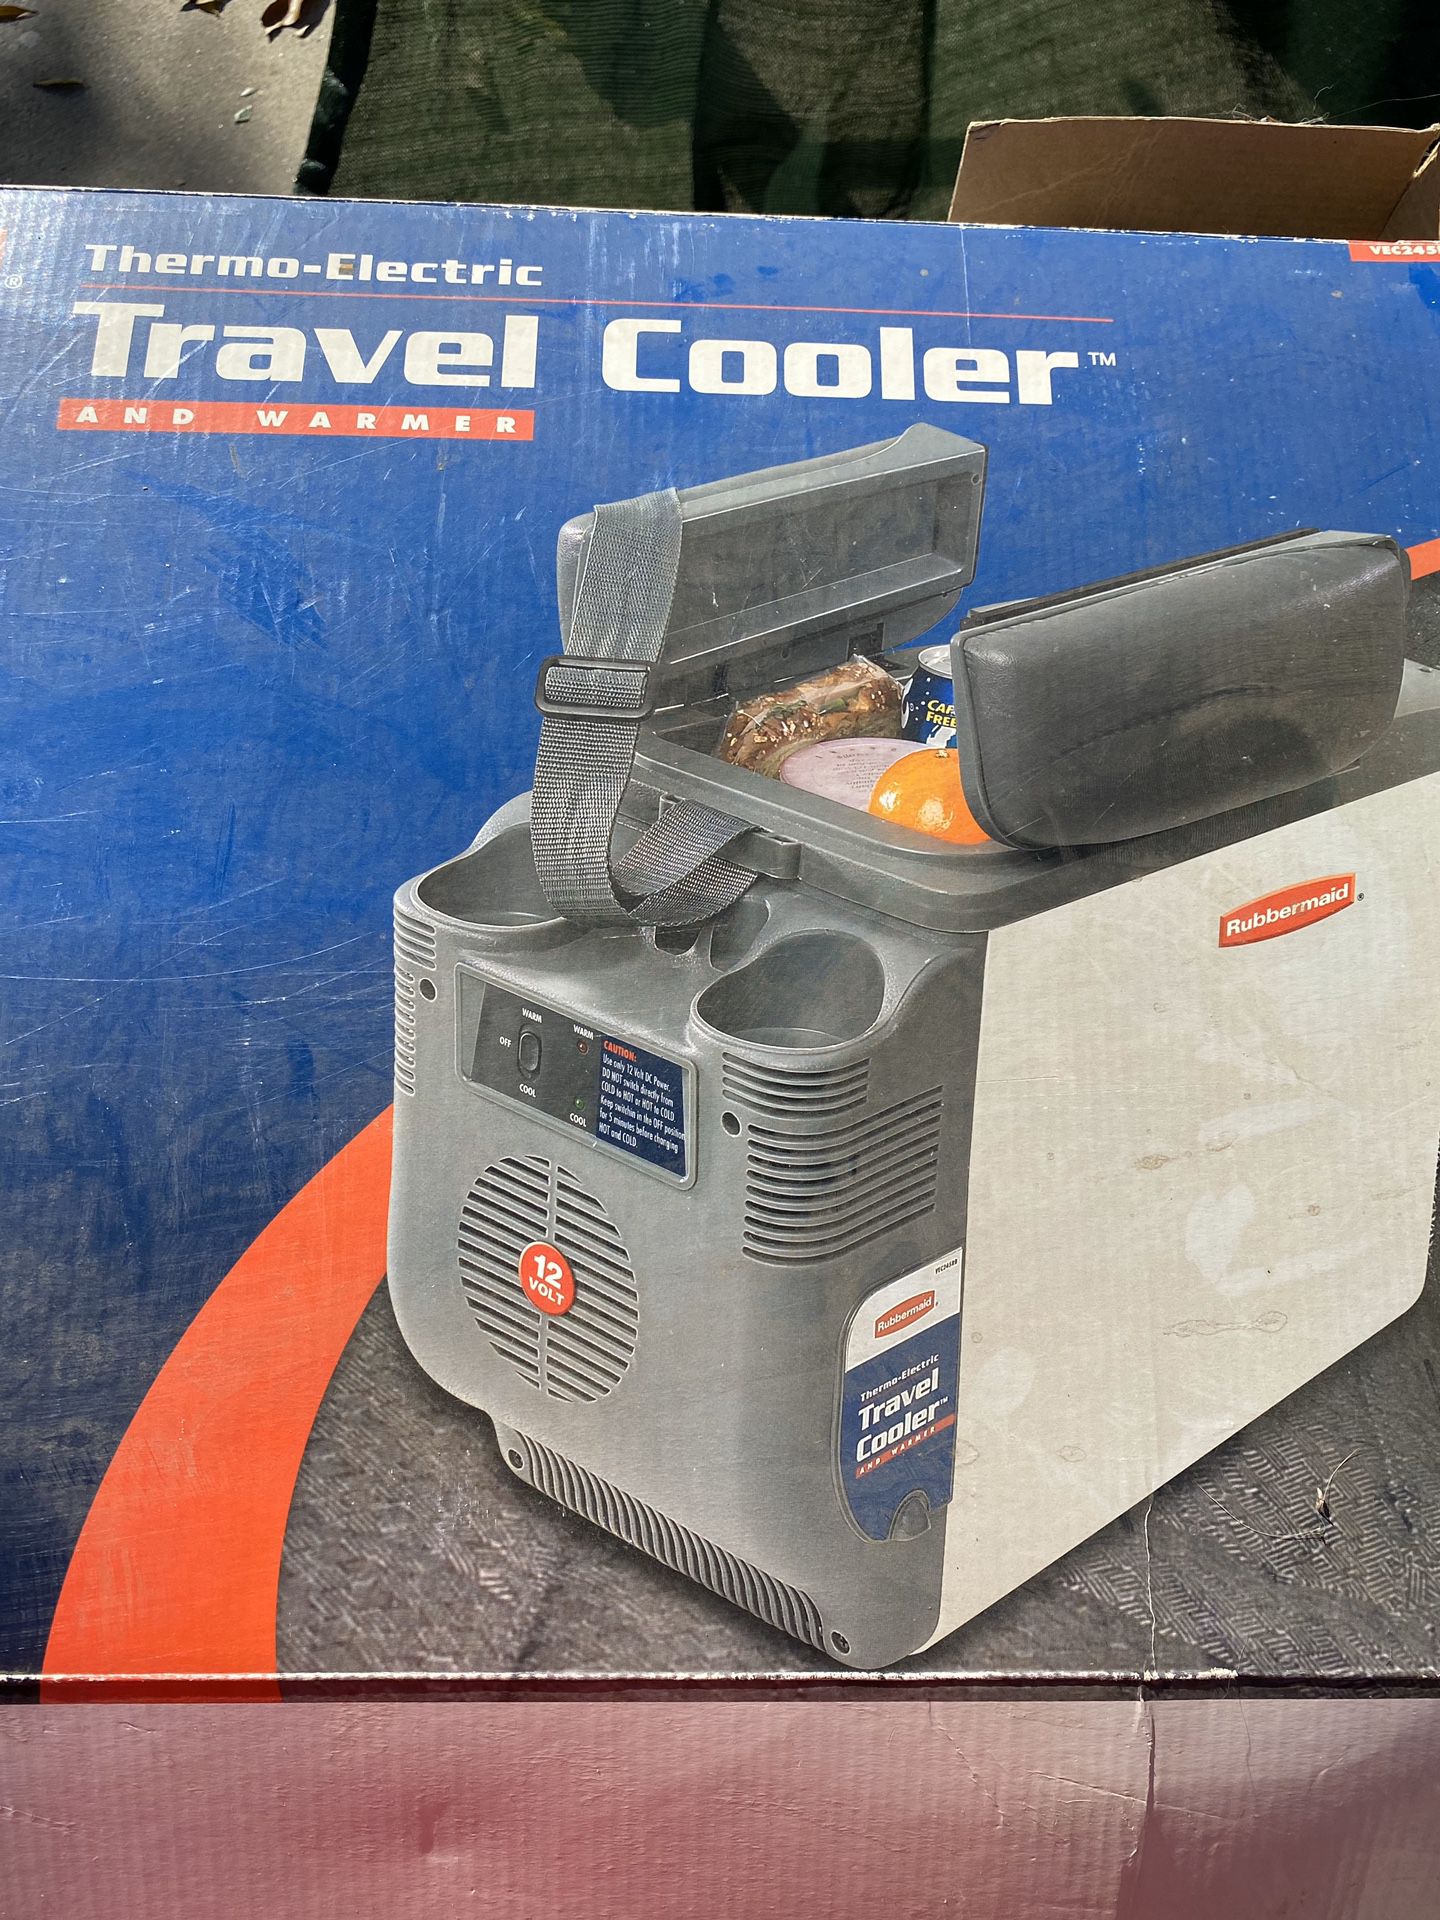 Thermo-Electric Travel Cooler and warmer